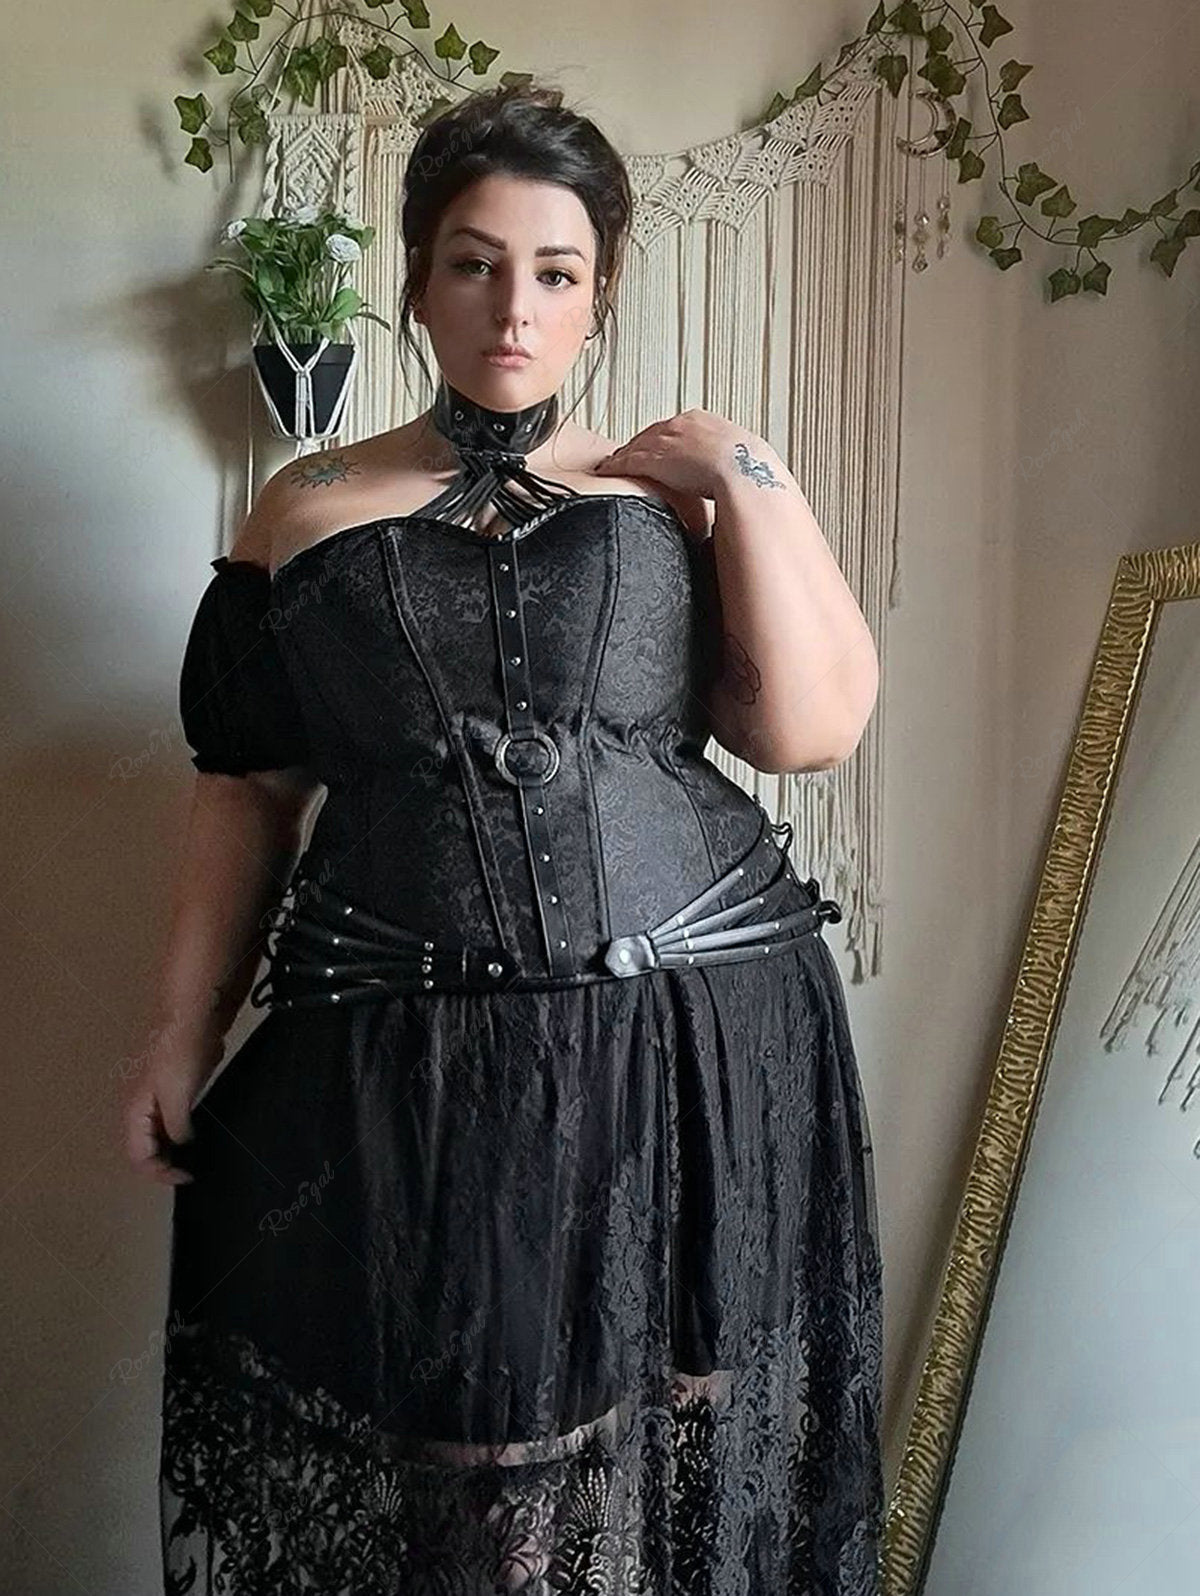 Is That The New Goth Women's Plus Size Lace Halter Bra ??